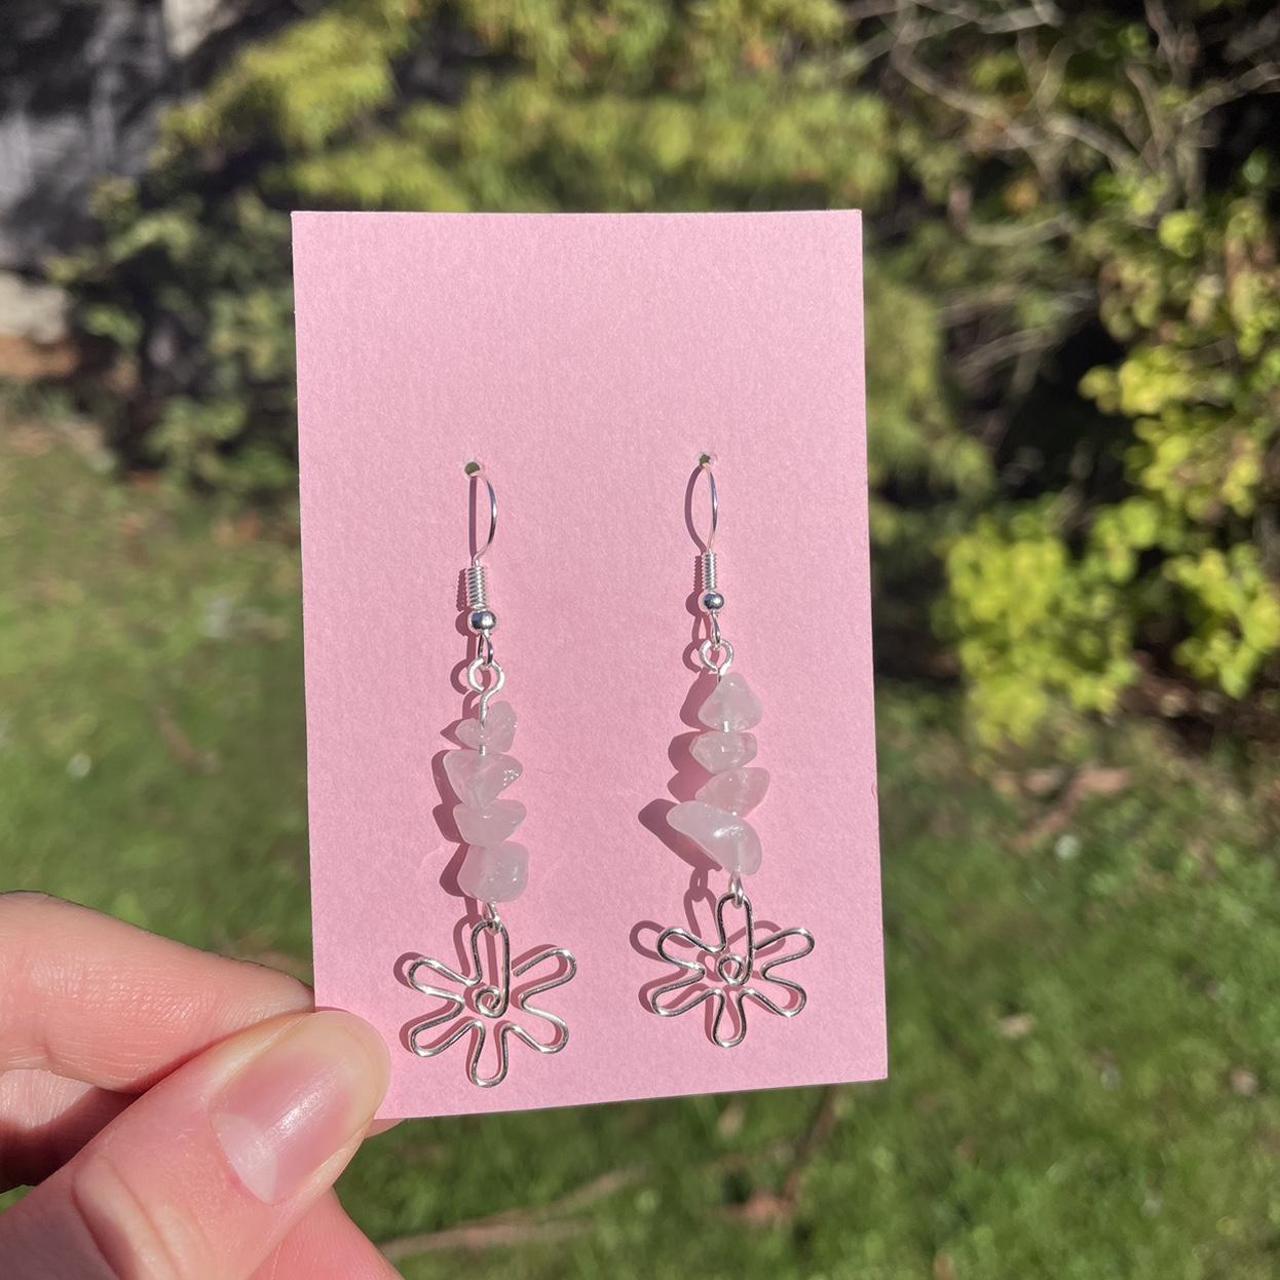 Boobies earrings 💕 (medium size, I also have a - Depop